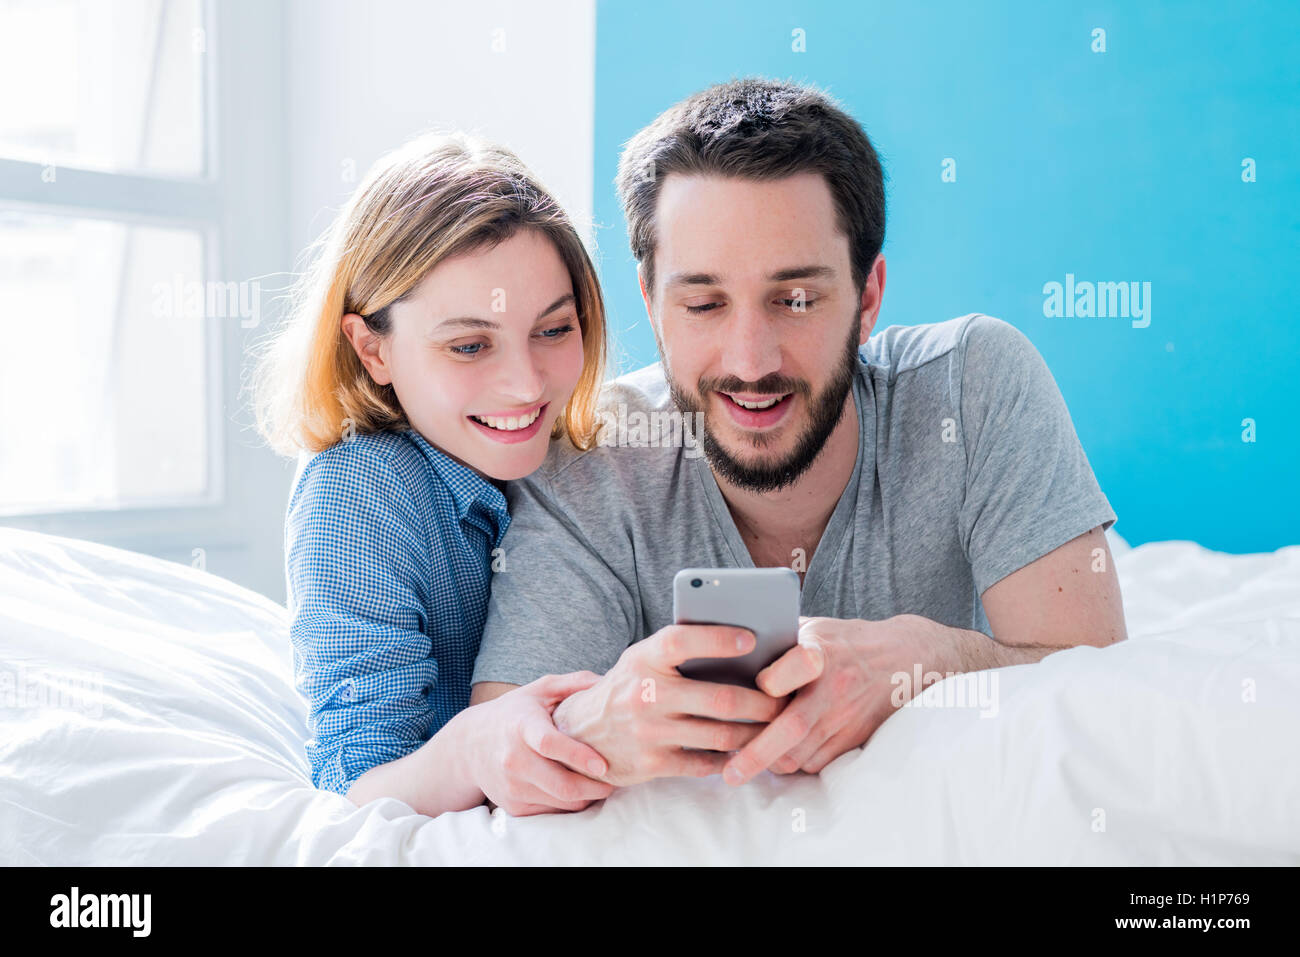 Couple using a smartphone. Stock Photo